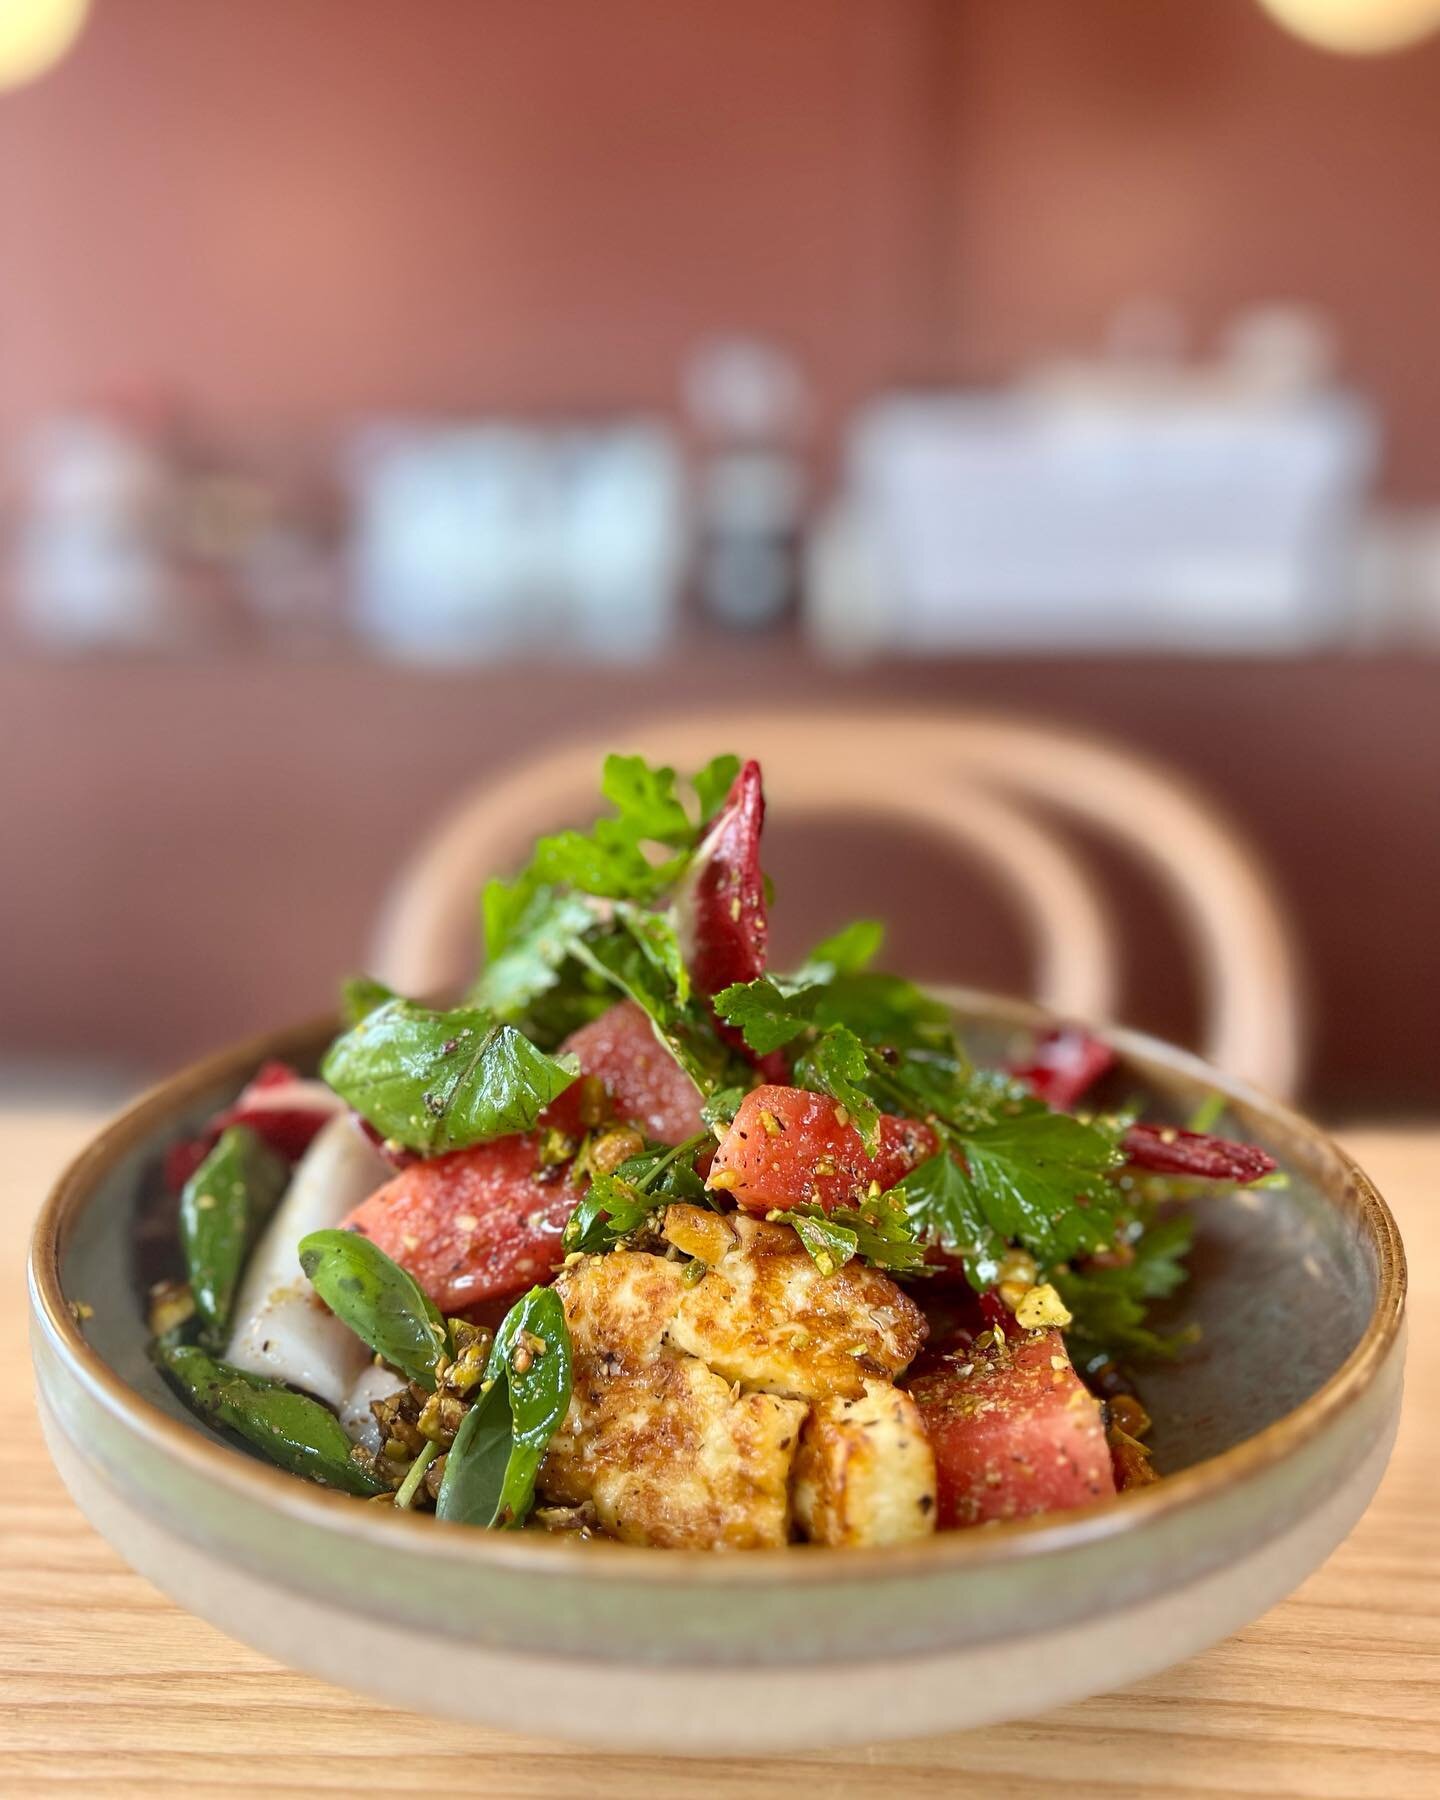 Halloumi salad perfectly balanced with the refreshing slices of watermelon, the crisp crunch of witlof and sprinkling of pistachios.